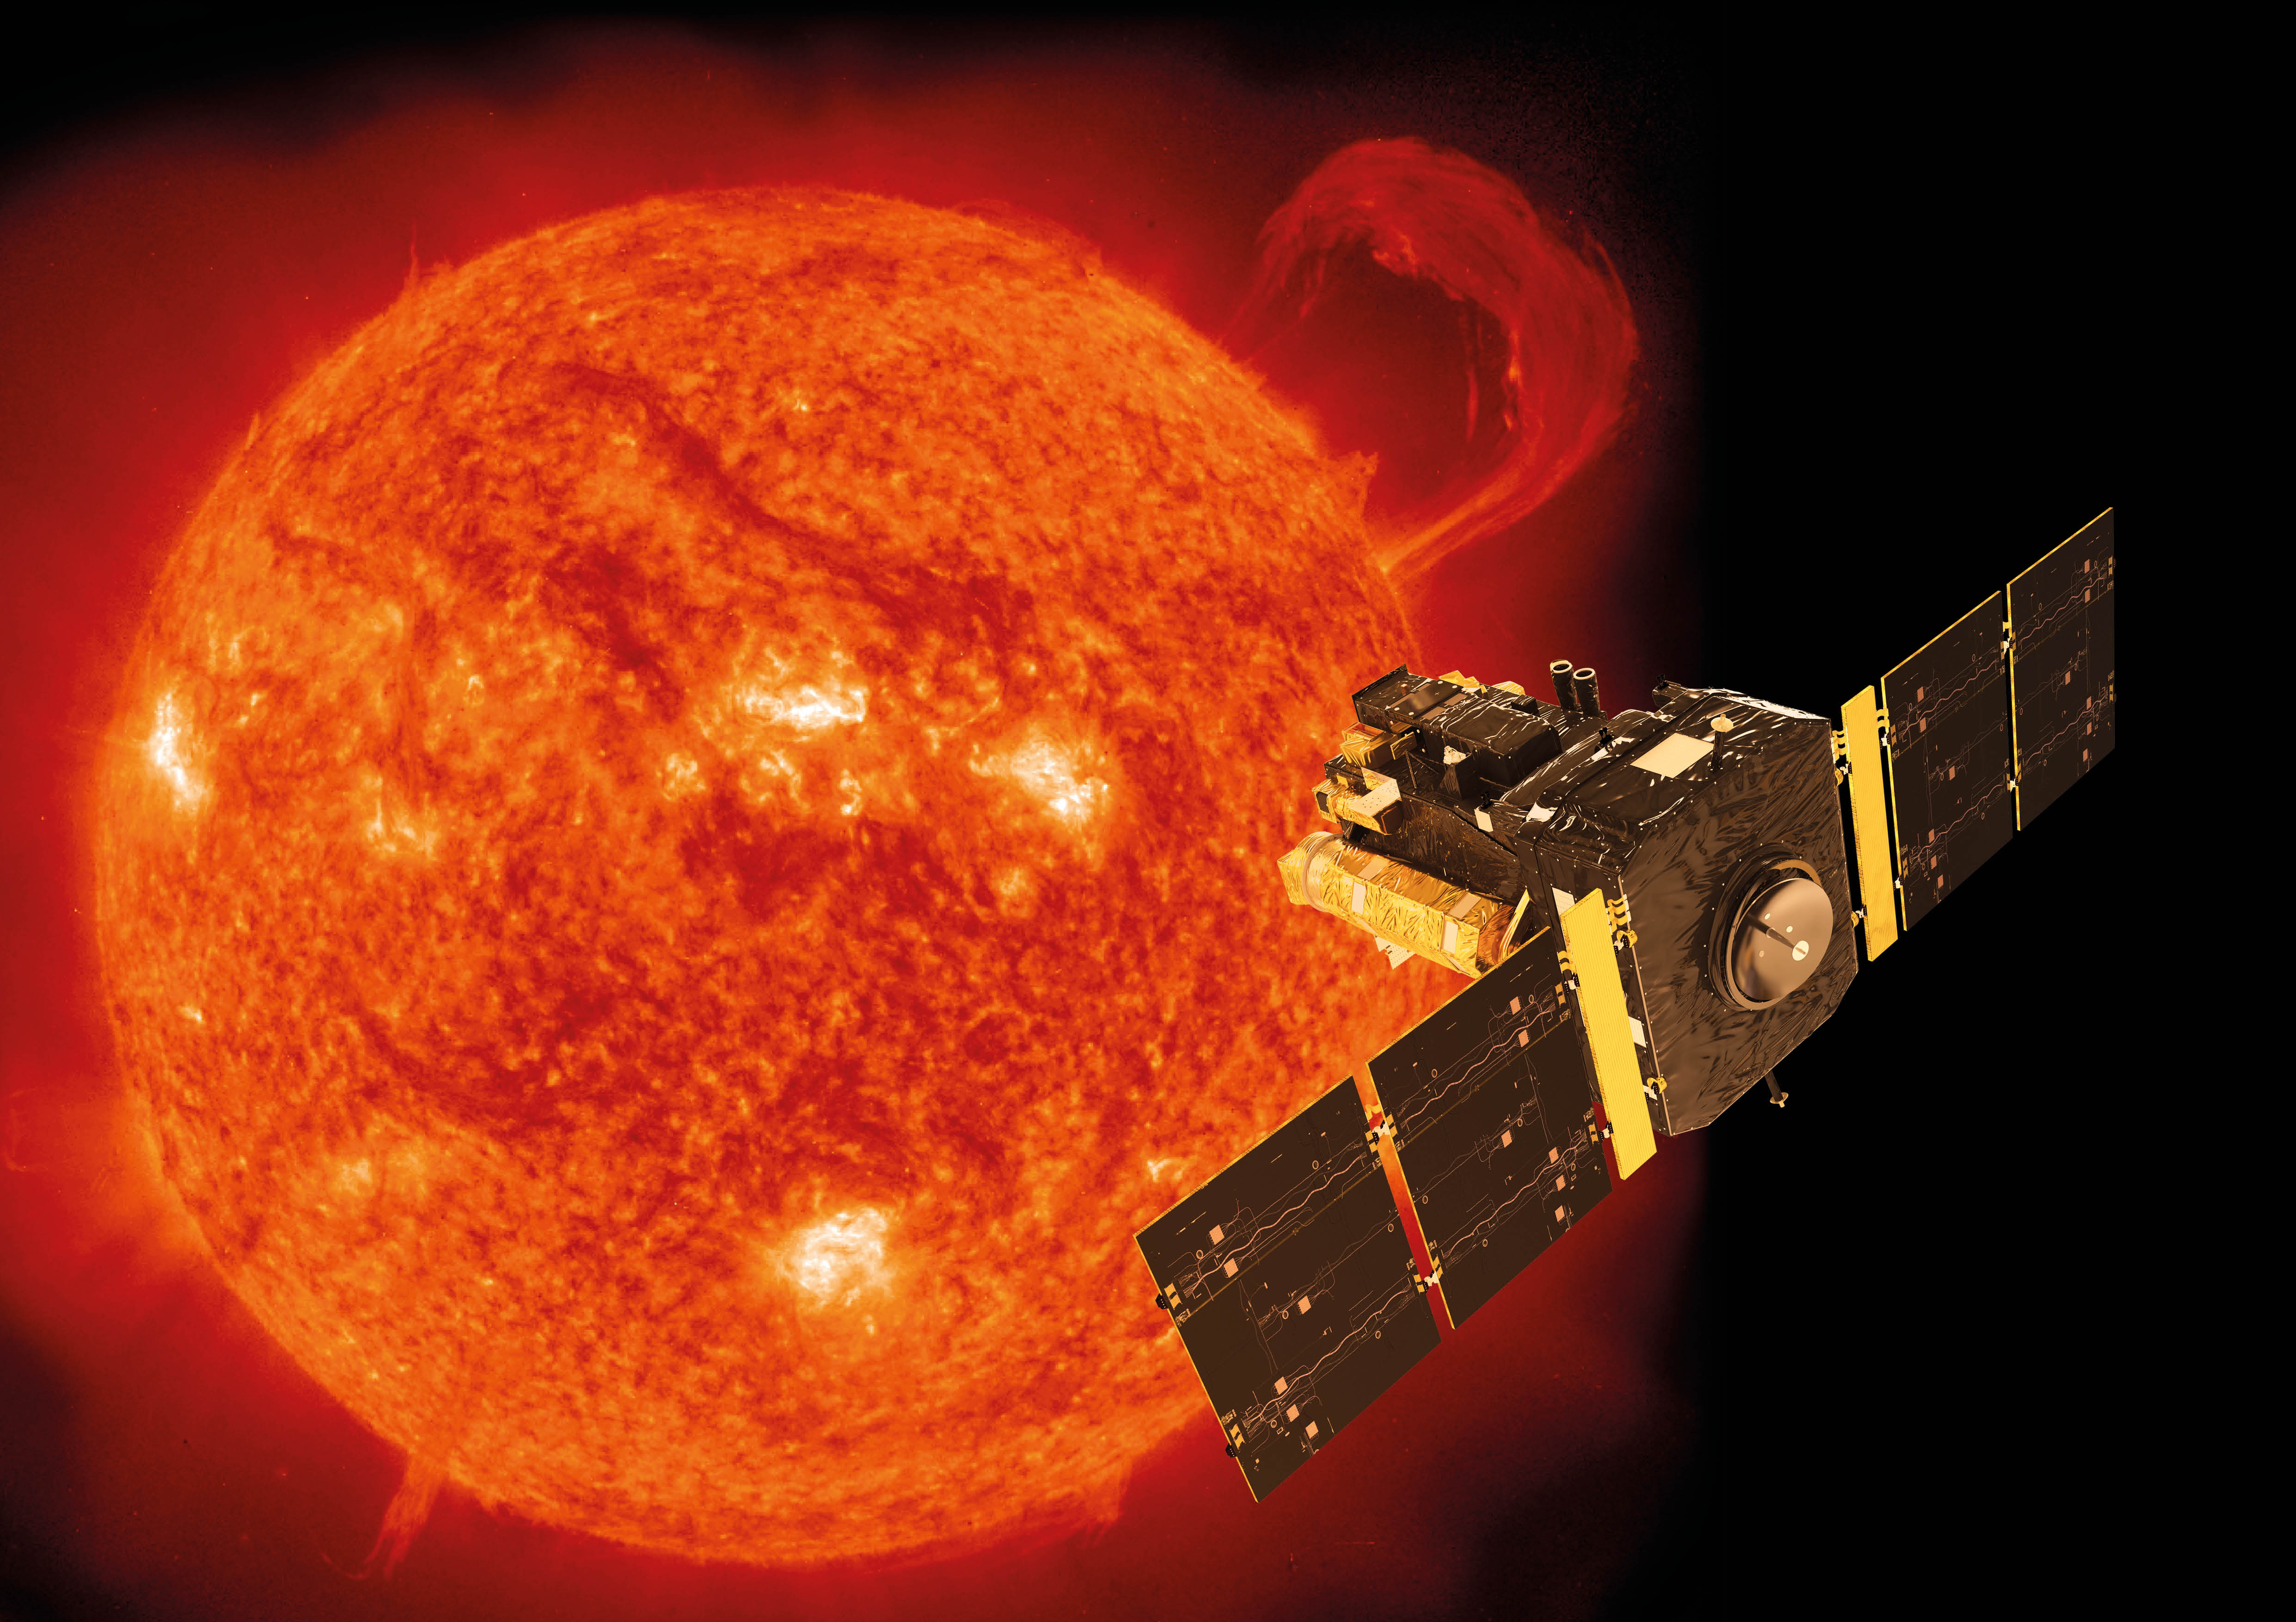 Artist’s impression of the ESA–NASA Solar and Heliospheric Observatory, SOHO, with the Sun as seen by the satellite’s extreme-ultraviolet imaging telescope on 14 September 1999